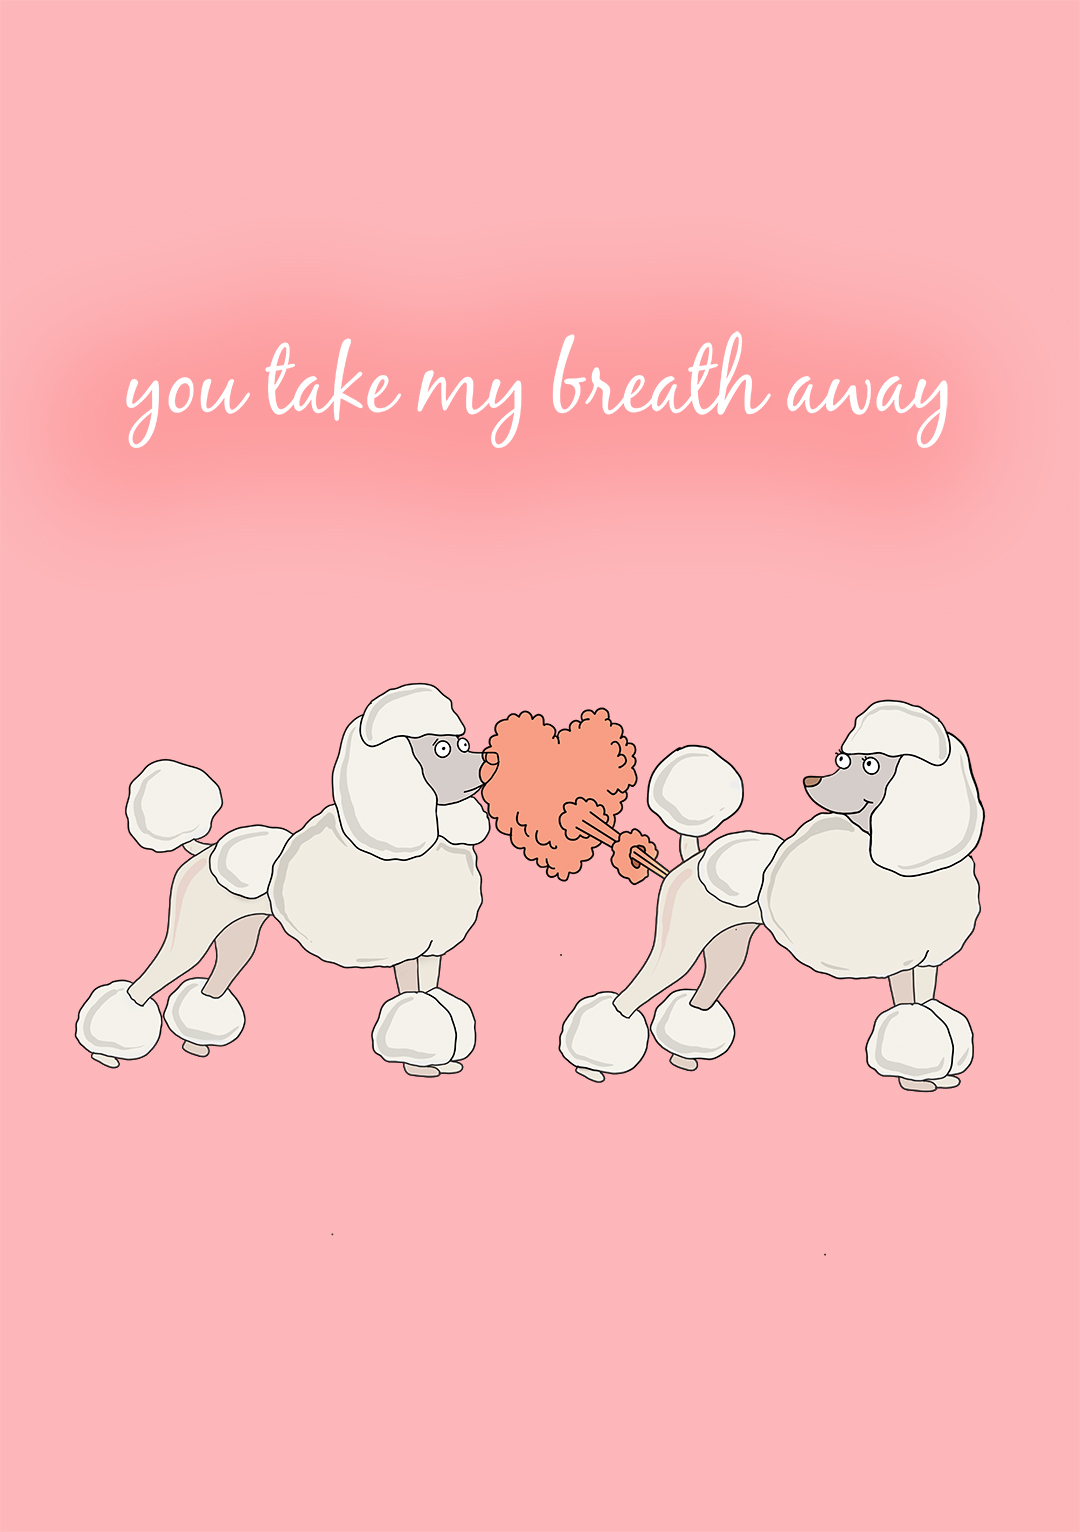 You Take My Breathe Away - Funny Poodle Card